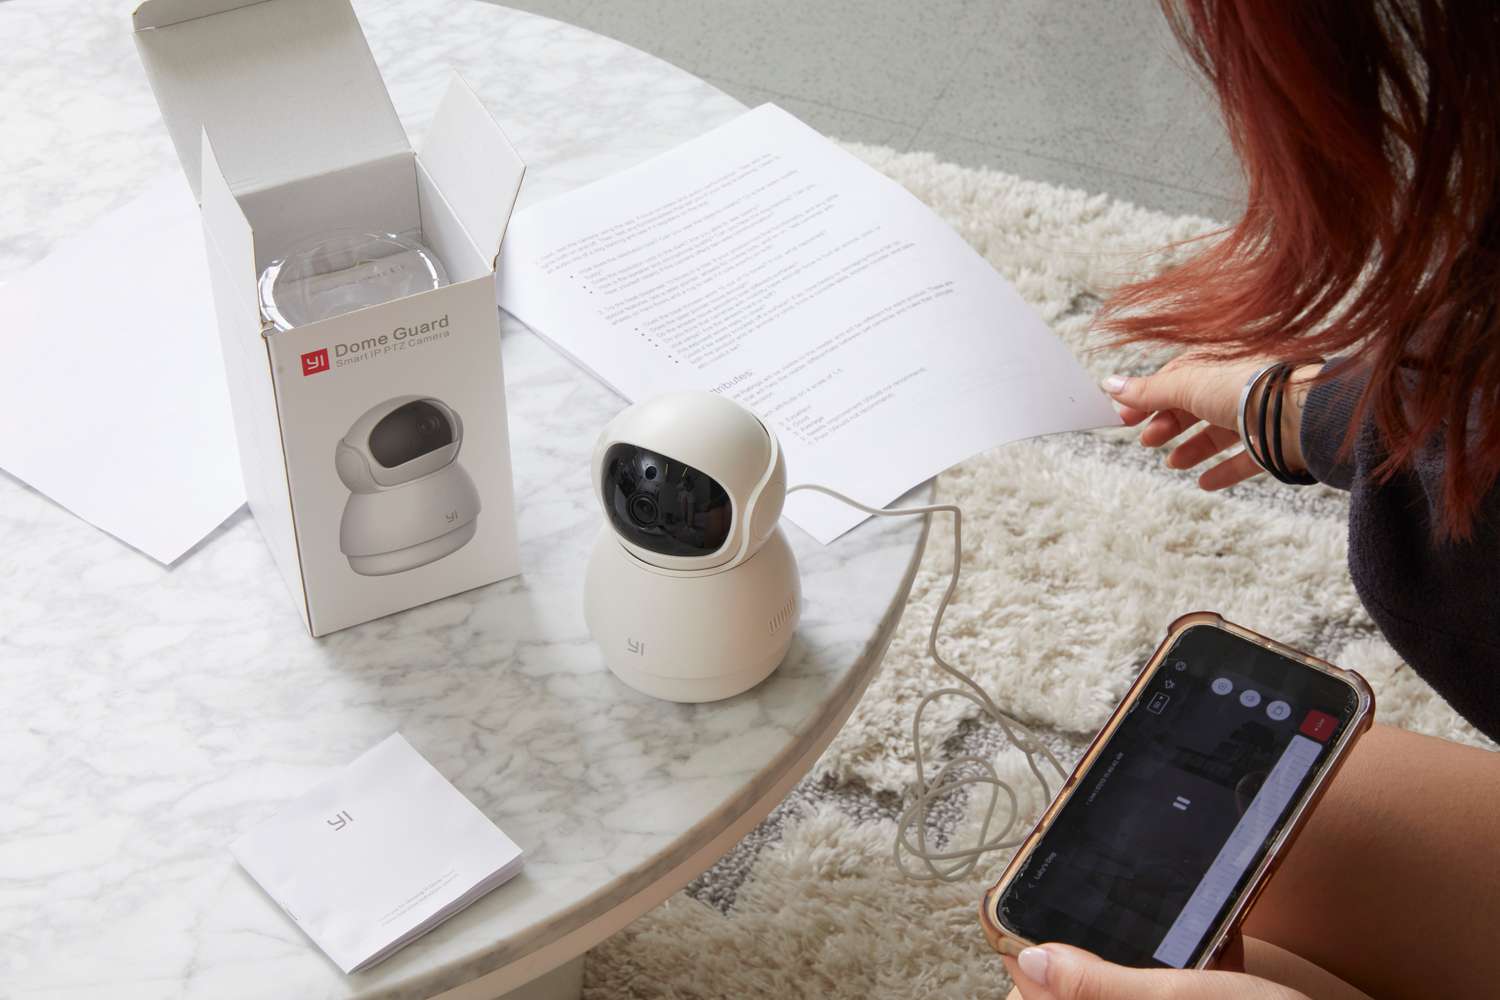 Person holding their phone with the YI Technologies Dome Pet Camera app displayed while looking at the instructions manual